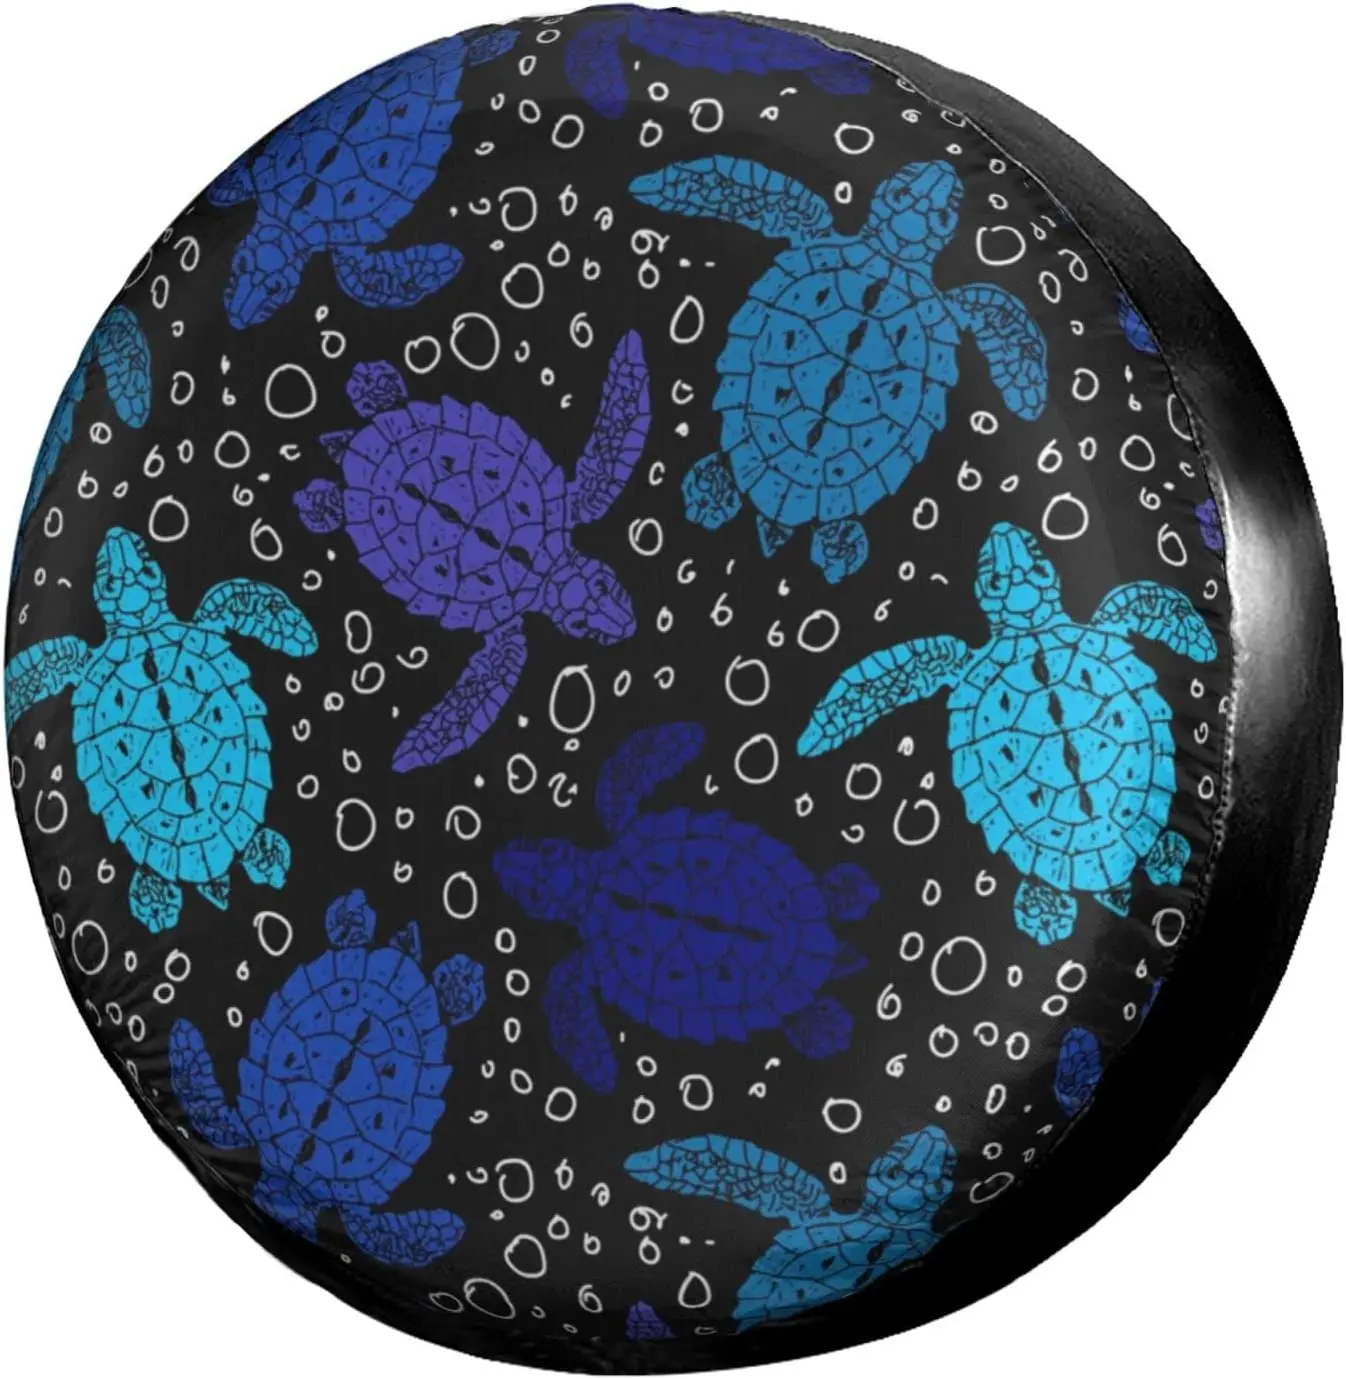 

Turtles Ocean Cute Spare Tire Cover Waterproof Dust-Proof Tire Covers Fit for,Trailer, Rv, SUV and Many Vehicle